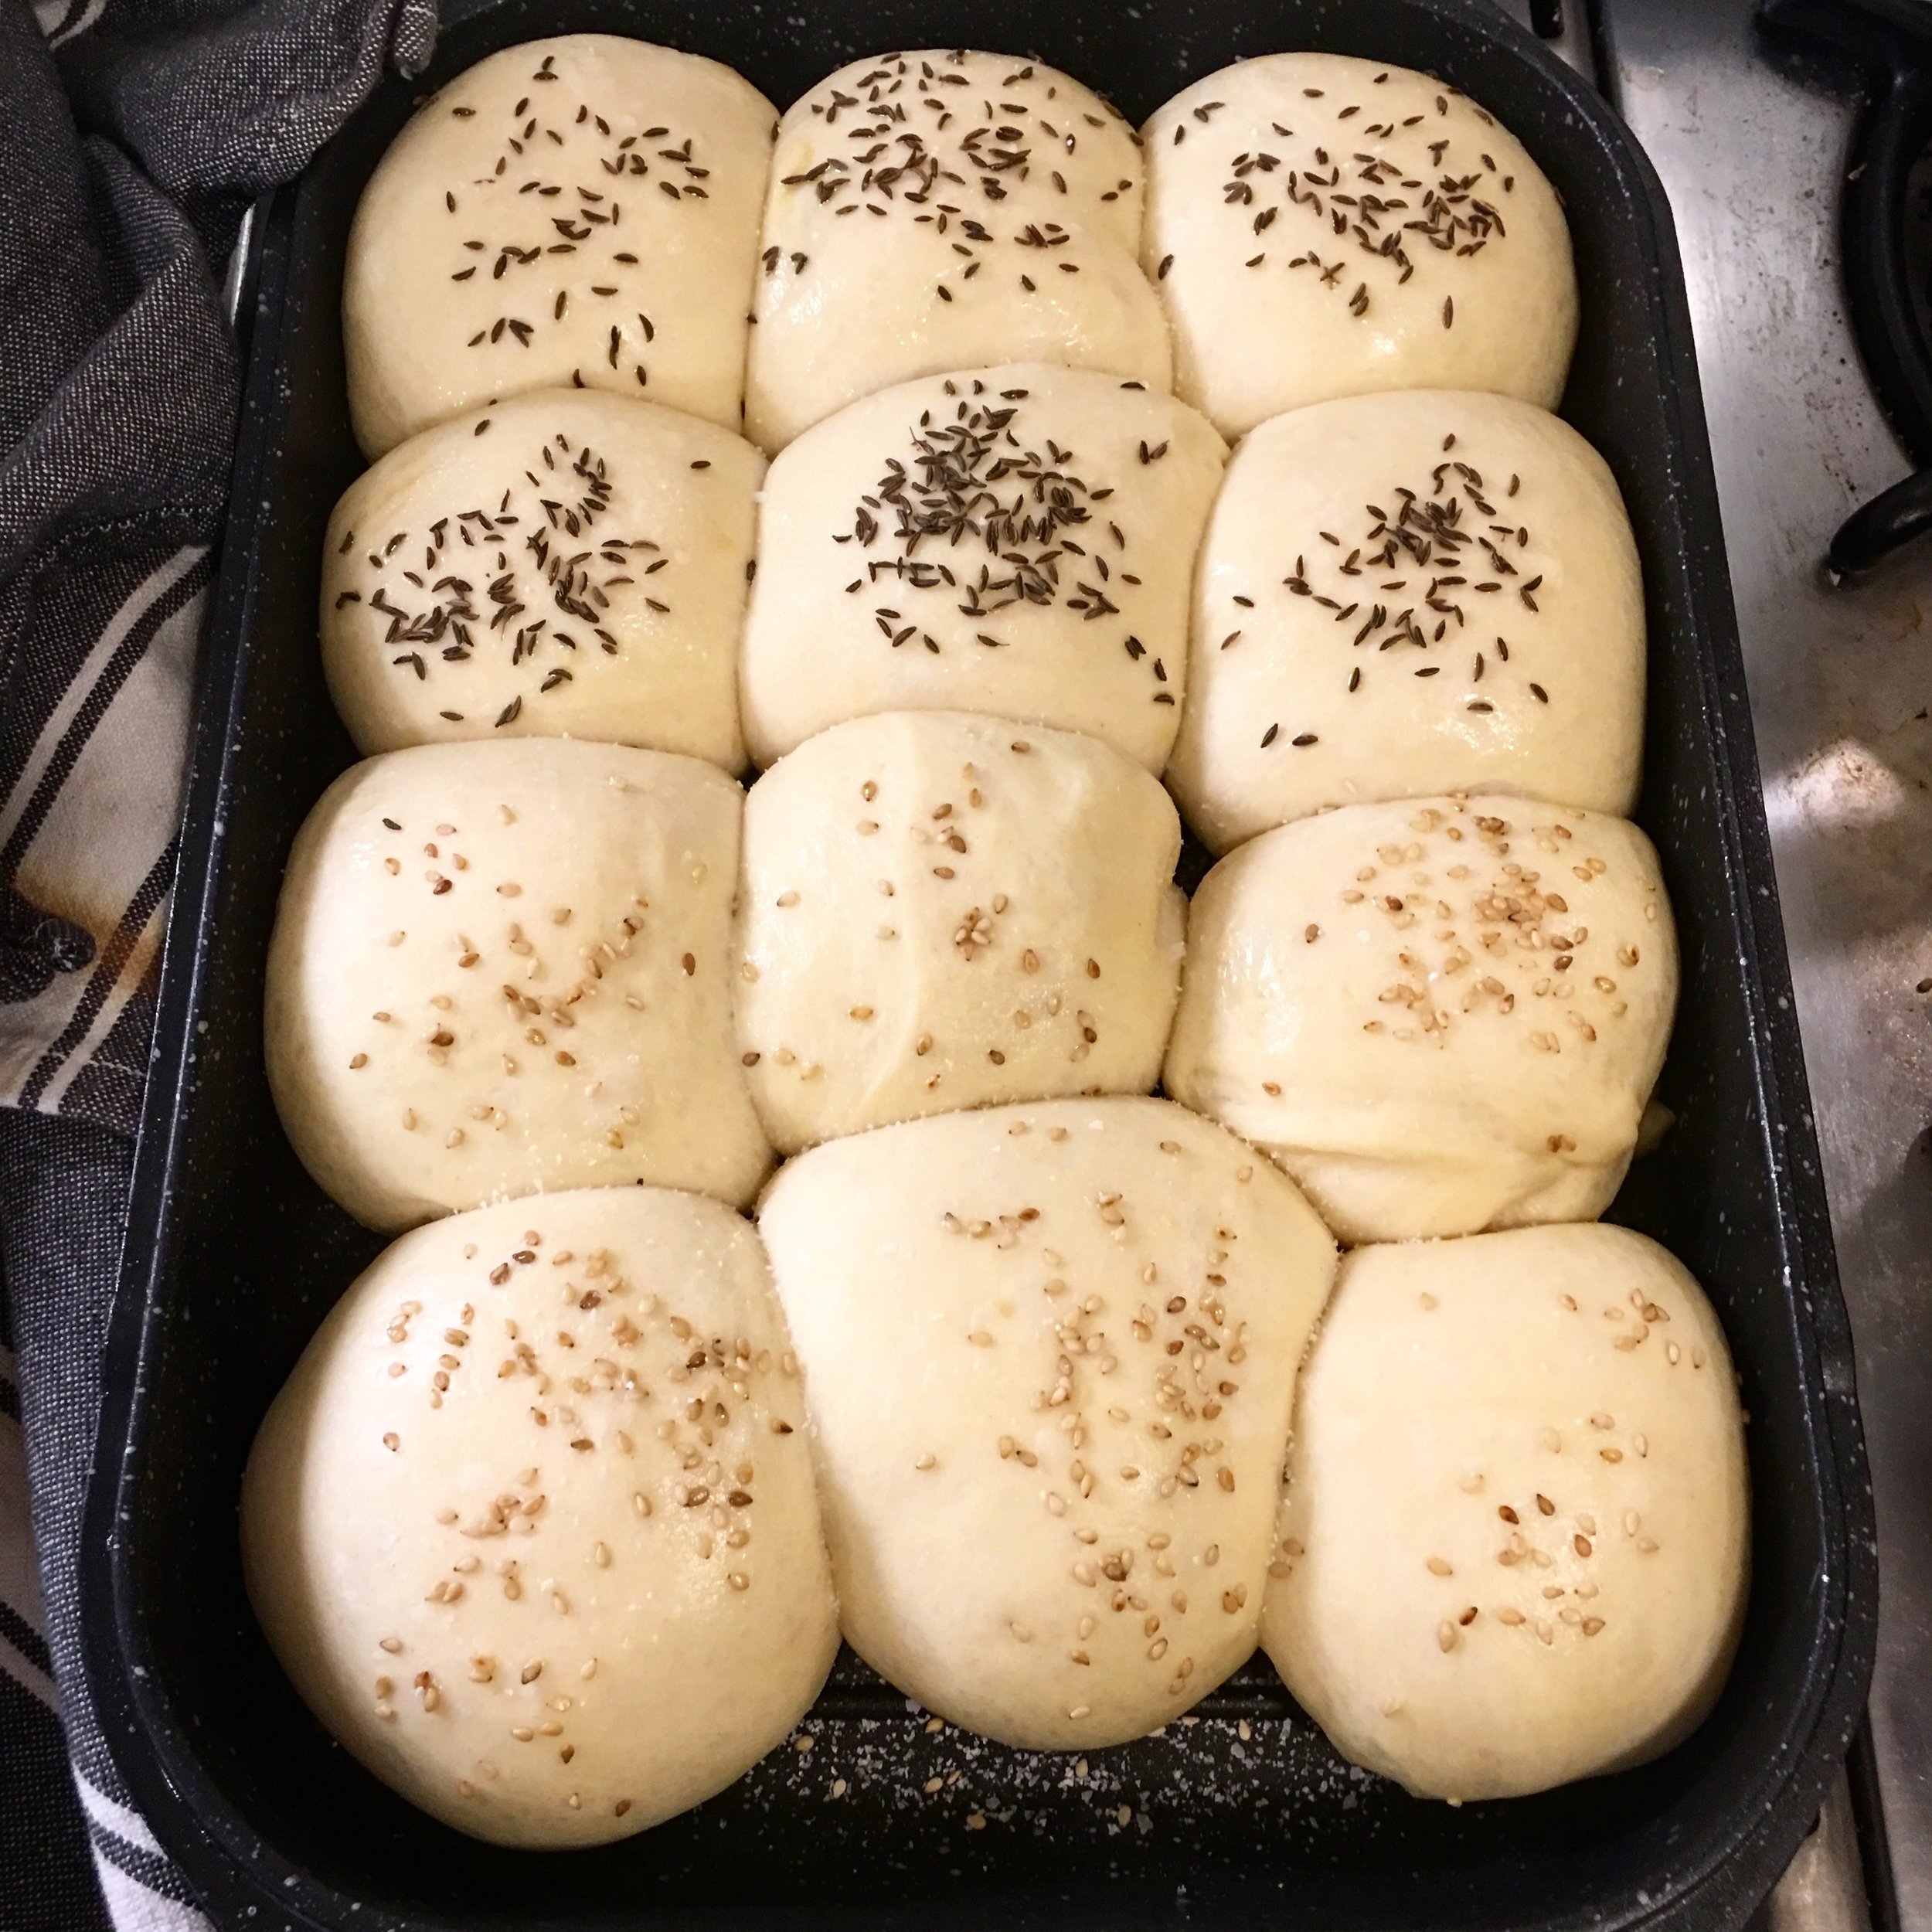 The top of our famous double-roaster is great for making bread. These buns, topped with sesame or caraway, are soft, smell great, and tear perfectly for dipping into the pesto or wiping the plate clean. Right? Who's with me? By the way, I hate the word "roll". It's a roll. But for deep, inexplicable-family-history-reasons, the word "roll" just doesn't appeal to me. And, "pass the rolls" feels funny to say. "Let's roll down the hill," on the other hand sounds great to me, and like a good idea. Wait, have I gone on too long about this? Eat the buns. With pesto. Or -- hey, a pesto butter! (Two parts pesto to one part softened butter, just mash it all together and store in the fridge.) Good for the rolls - uh, buns - and for dropping on vegetables, potatoes, steak.